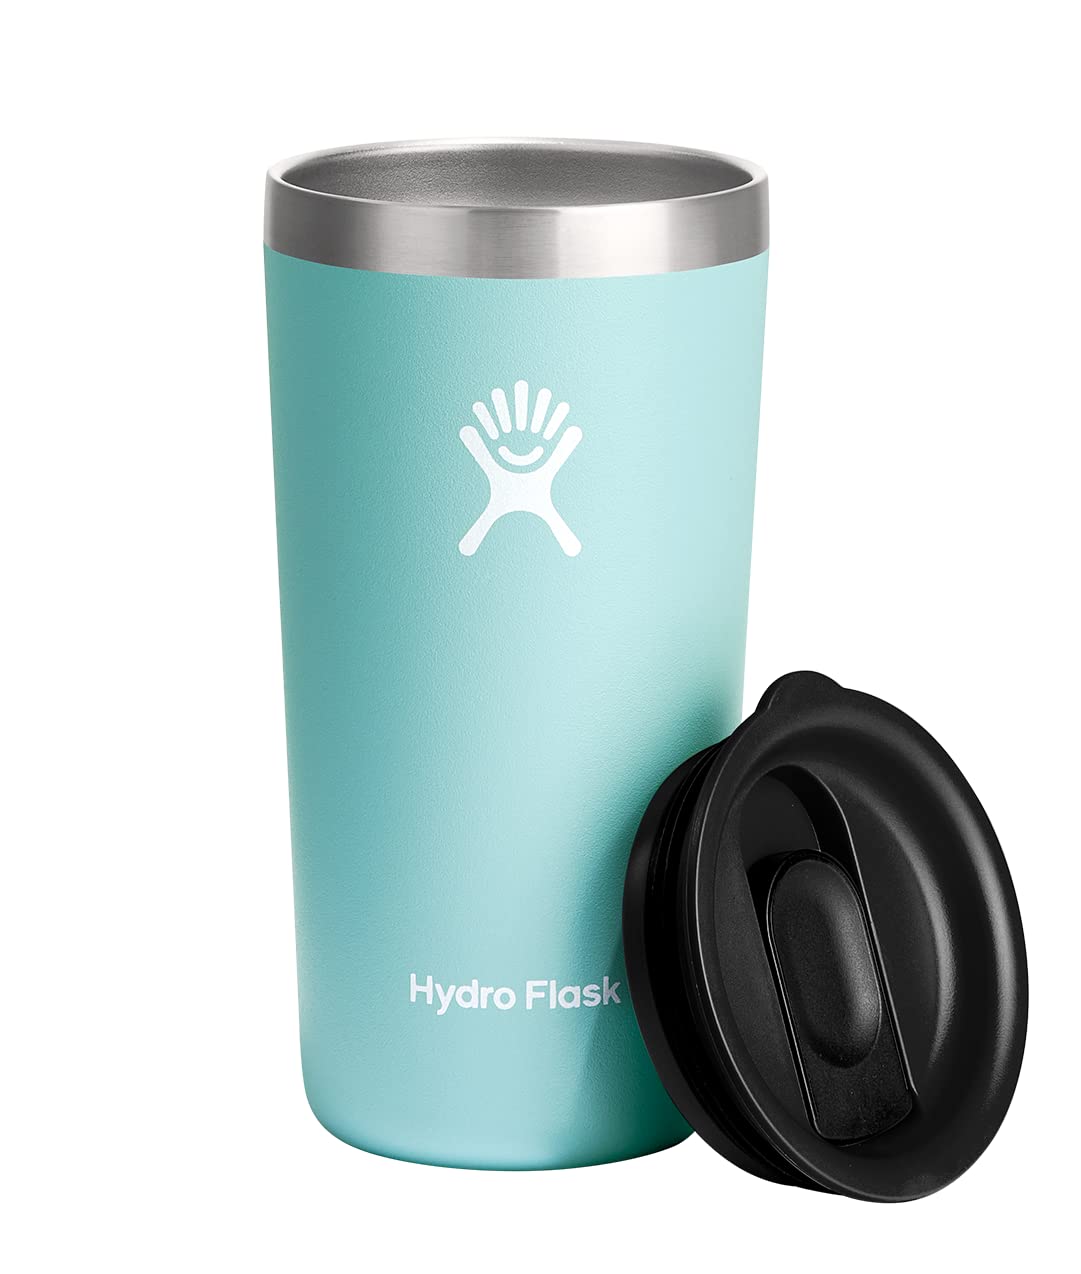 Hydro Flask Insulated Stainless Steel Tumblers 25% off (16oz for $18.71, 20oz for $20.96) + FS w/ Prime